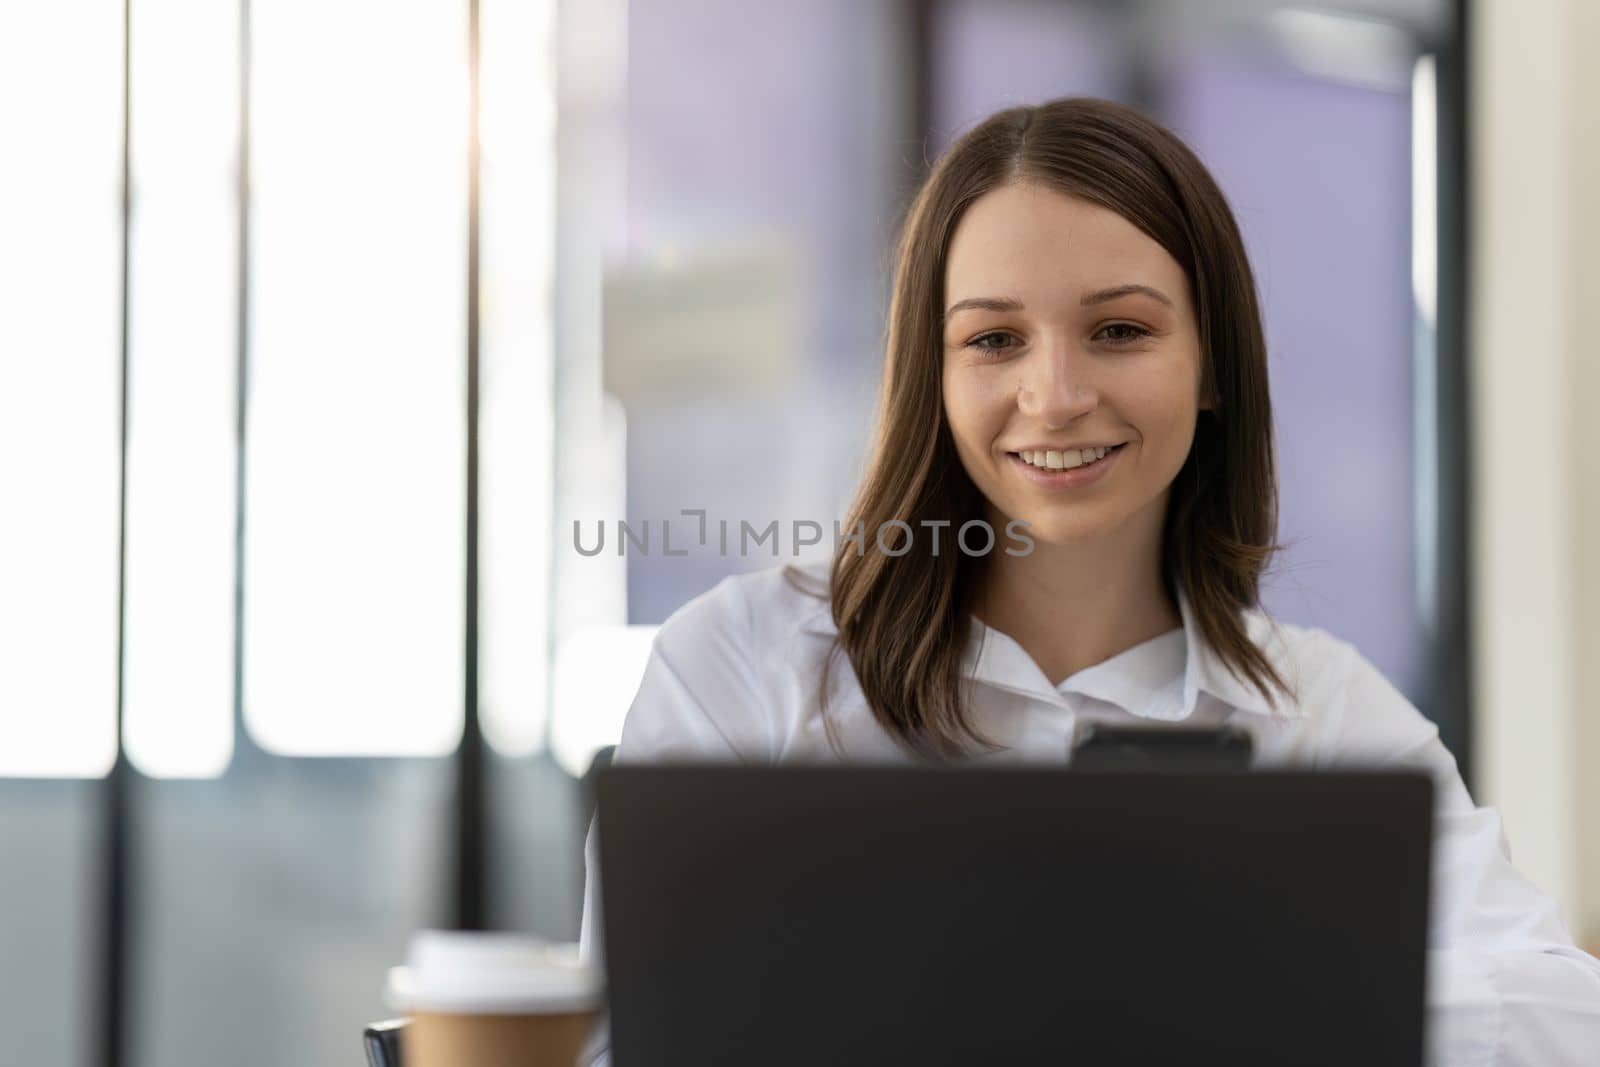 Portrait of smiling beautiful millennial businesswoman. happy female boss posing making headshot picture for company photoshoot, confident successful woman at work.